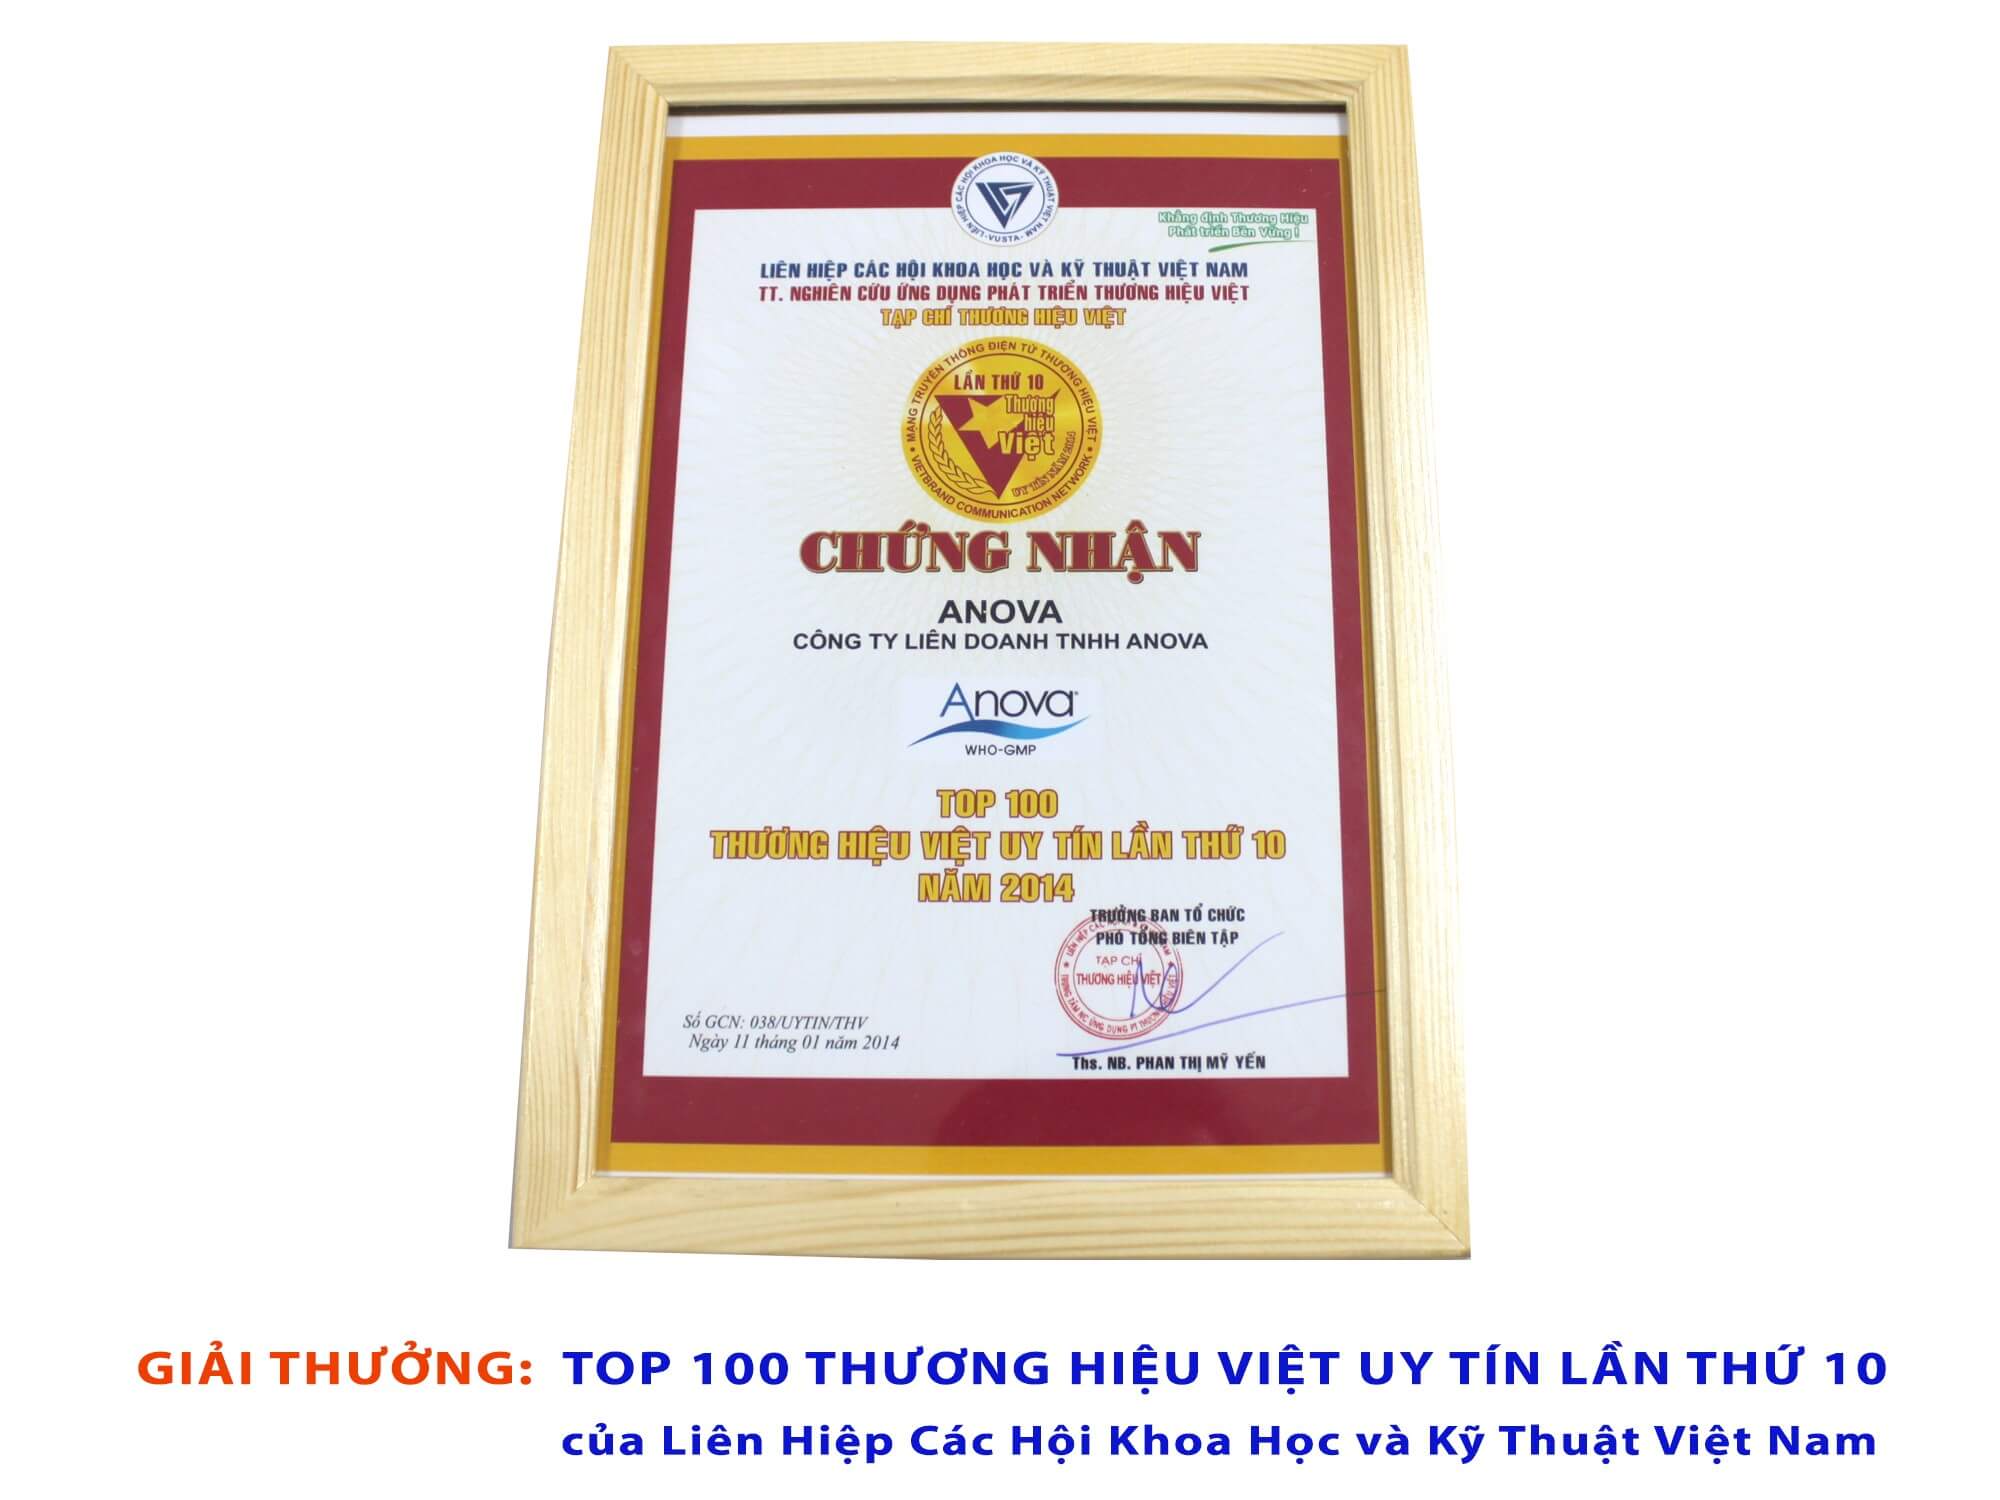 Certificate of Top 100 Vietnamese Prestige Brands for the 10th time in 2014 (voted by Vietnam Union of Science and Technology Associations (Vusta) and Vietnamese Brand Magazine).